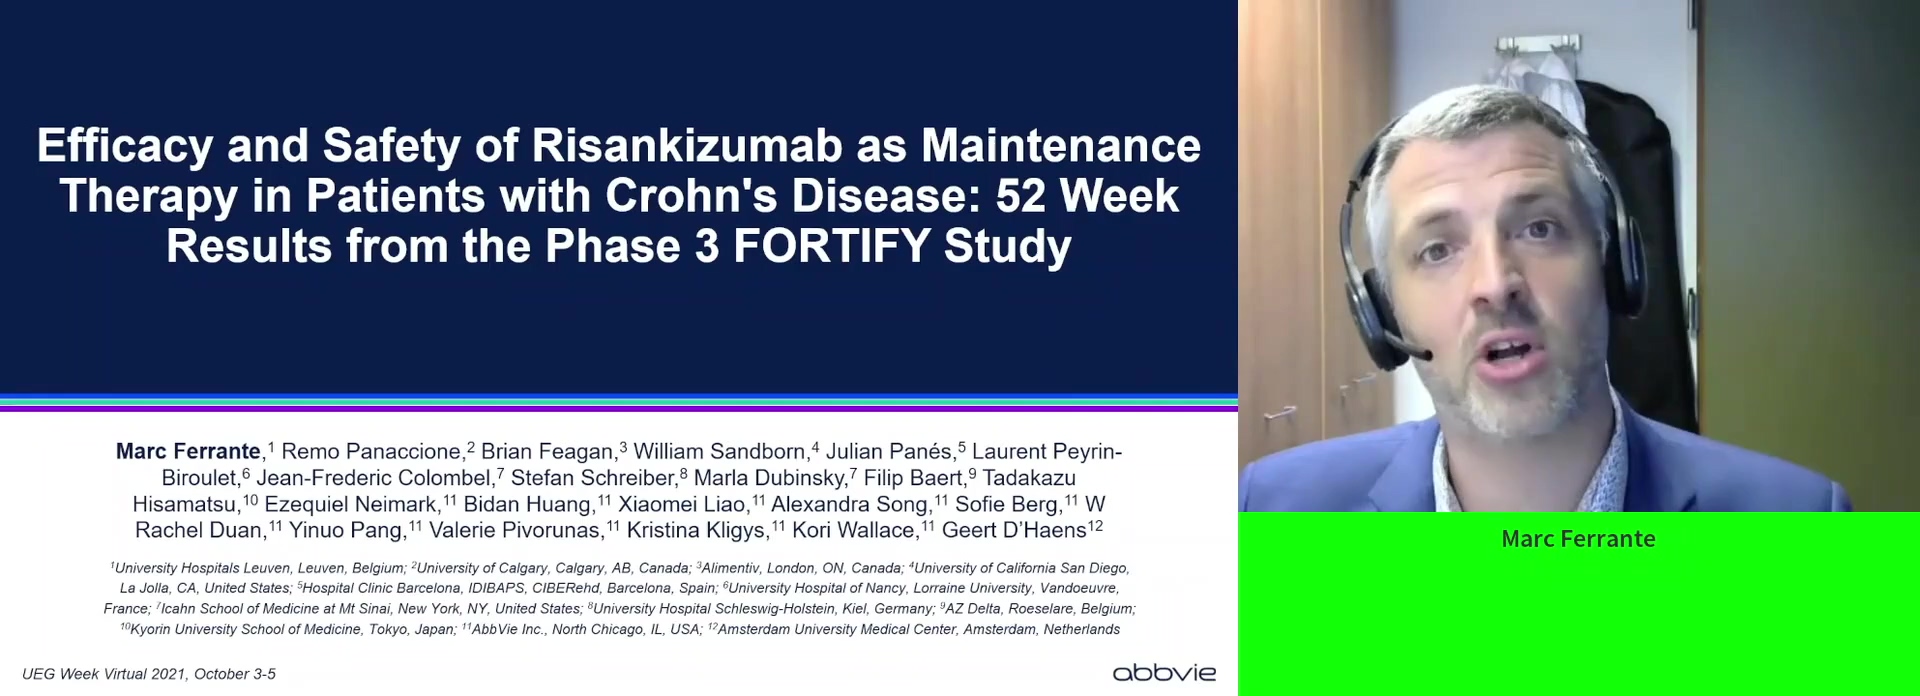 EFFICACY AND SAFETY OF RISANKIZUMAB AS MAINTENANCE THERAPY IN PATIENTS WITH CROHN'S DISEASE: 52 WEEK RESULTS FROM THE PHASE 3 FORTIFY STUDY